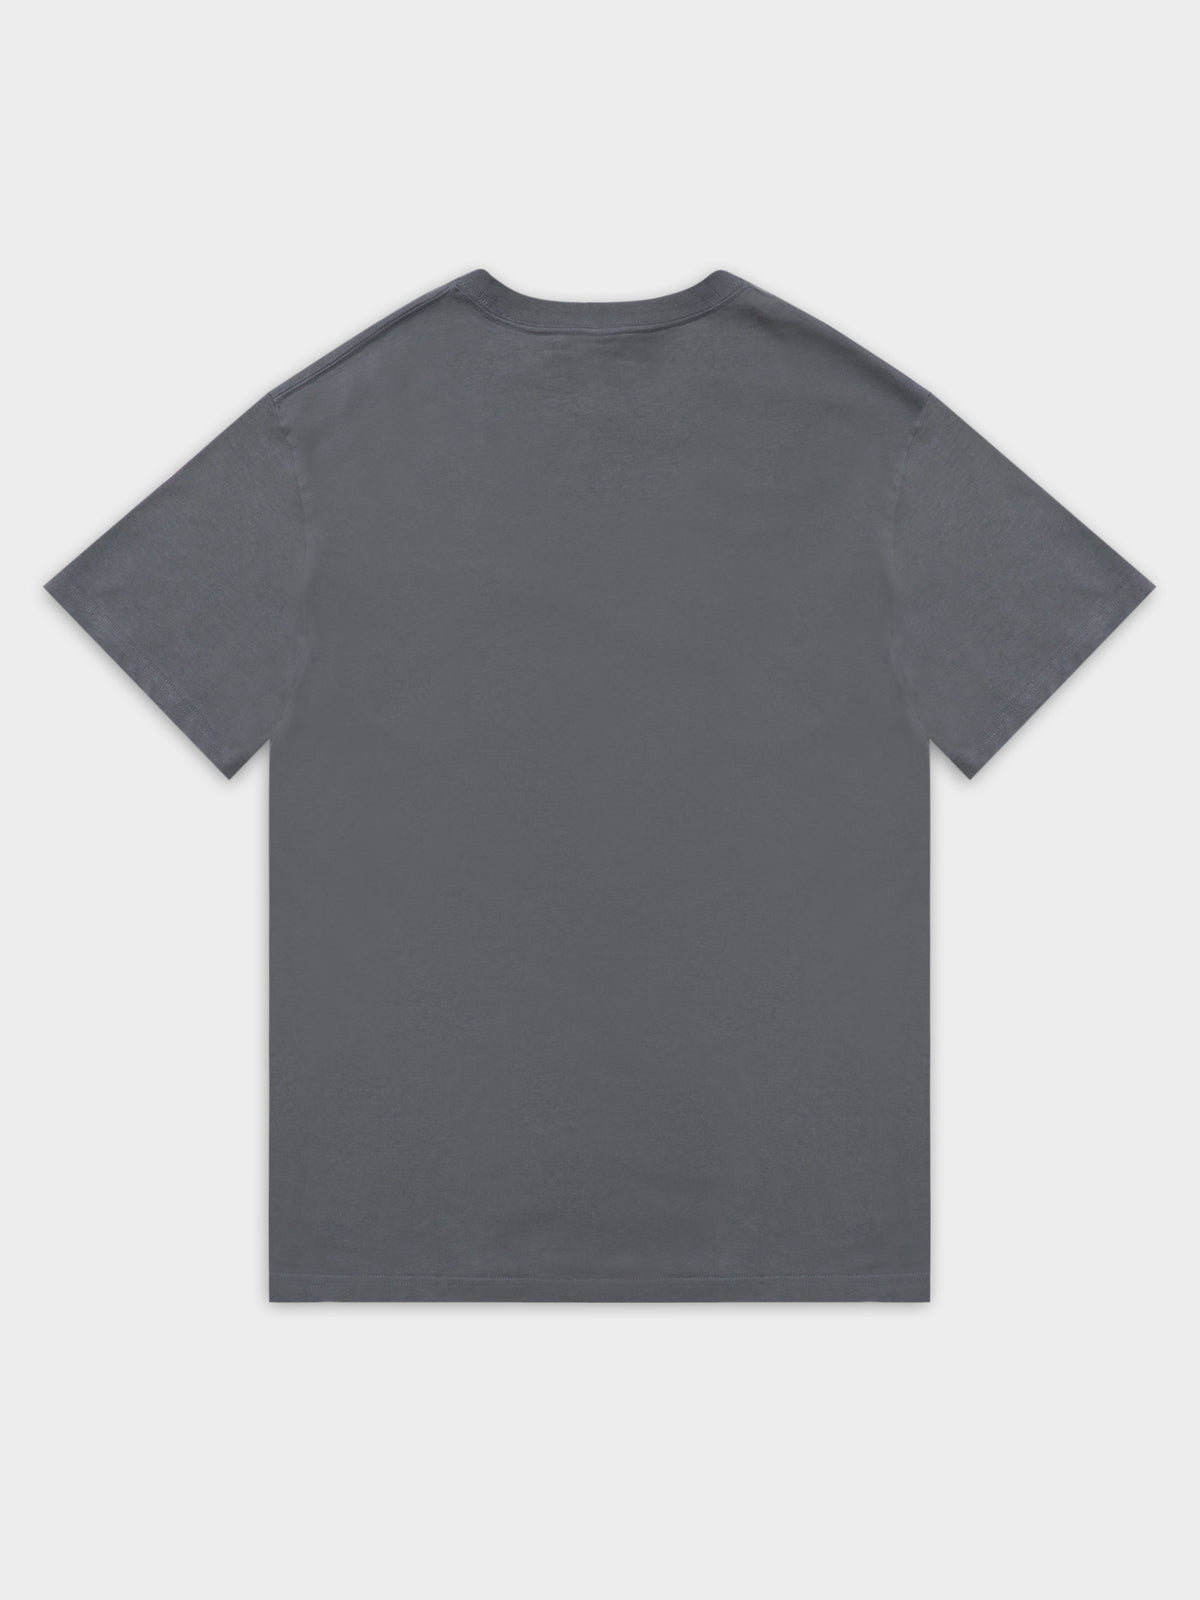 Ws450 Heavyweight T-Shirt in Charcoal